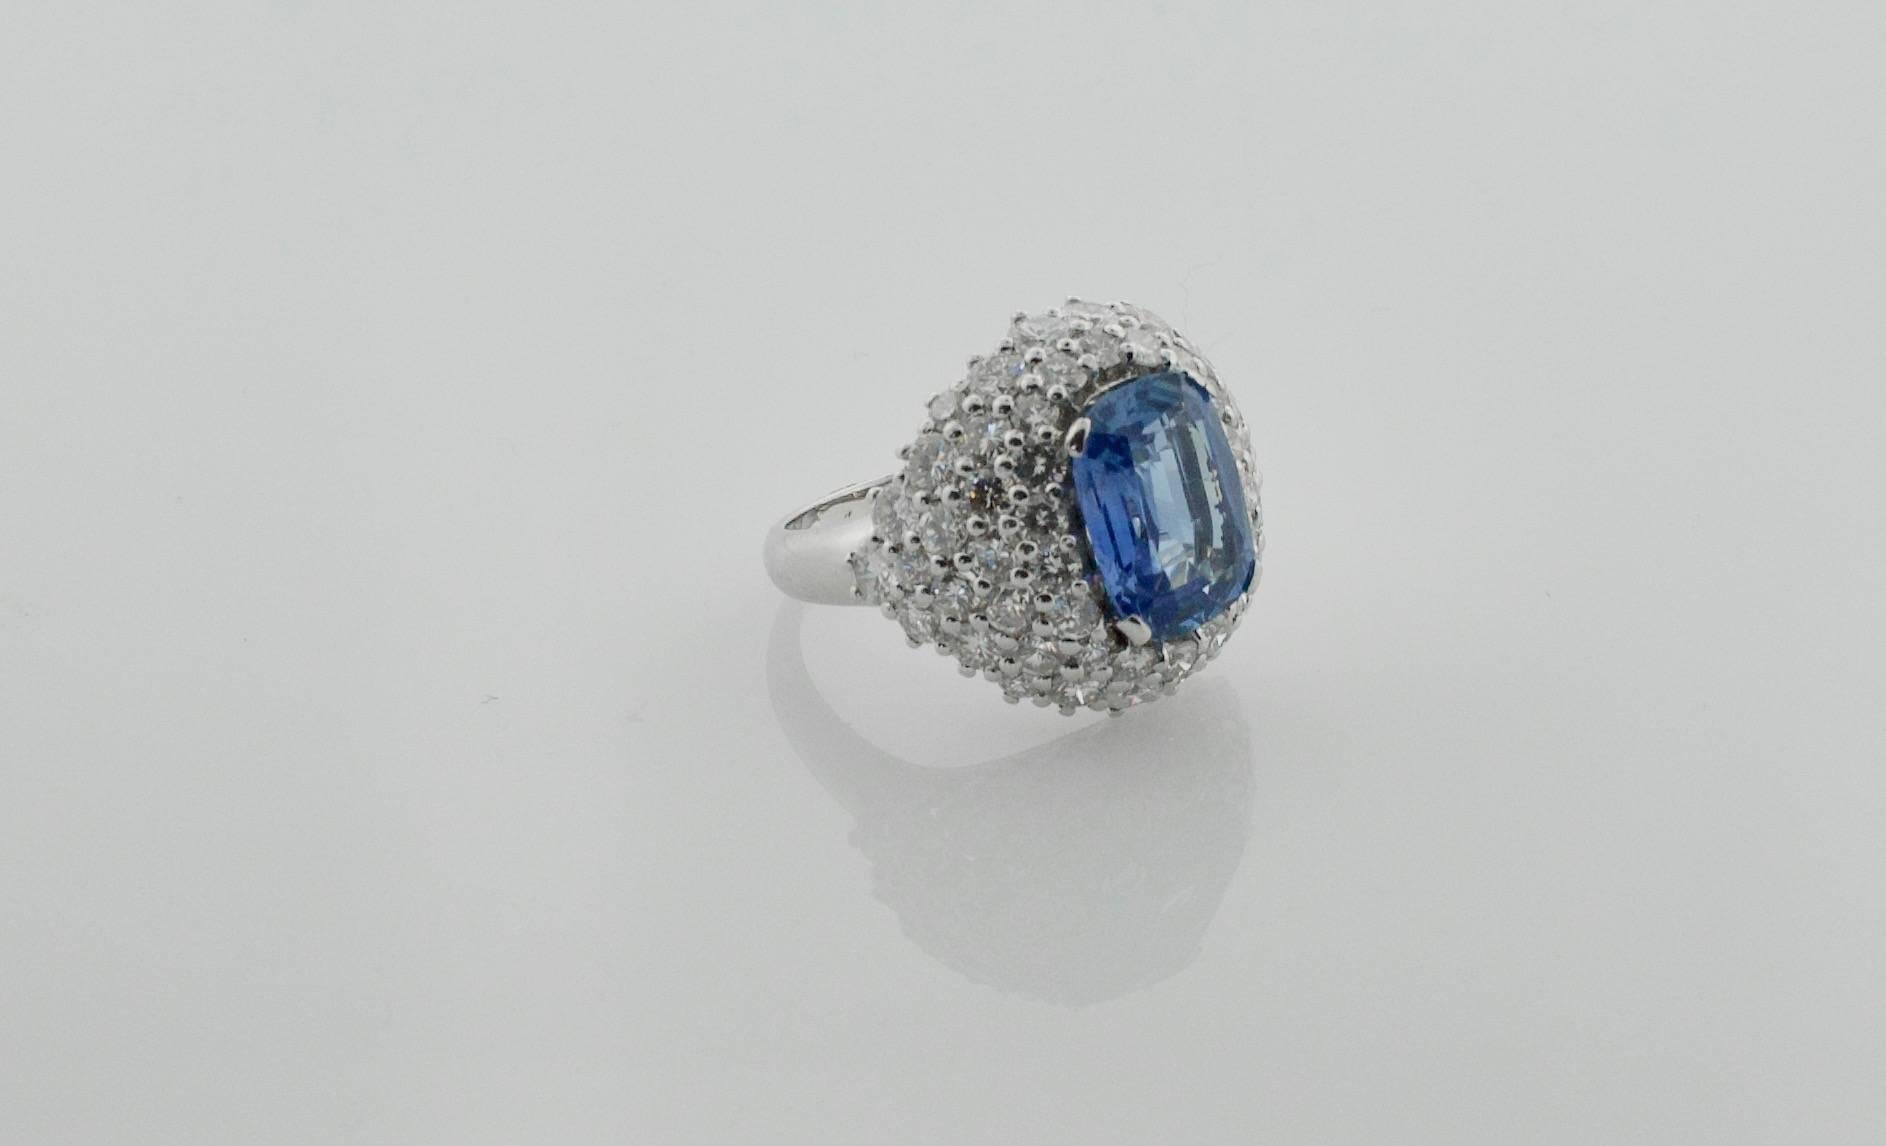 Sapphire and Diamond Ring in 18k Gold Circa 1940's
A Pastel Blue Cushion Cut Sapphire weighing 5.92 
Fifty Eight Round Brilliant Cut Diamonds weighing 6.00carats approximately color GH Clarity VS1-SI
The Setting Work on the Stones is Immaculate   